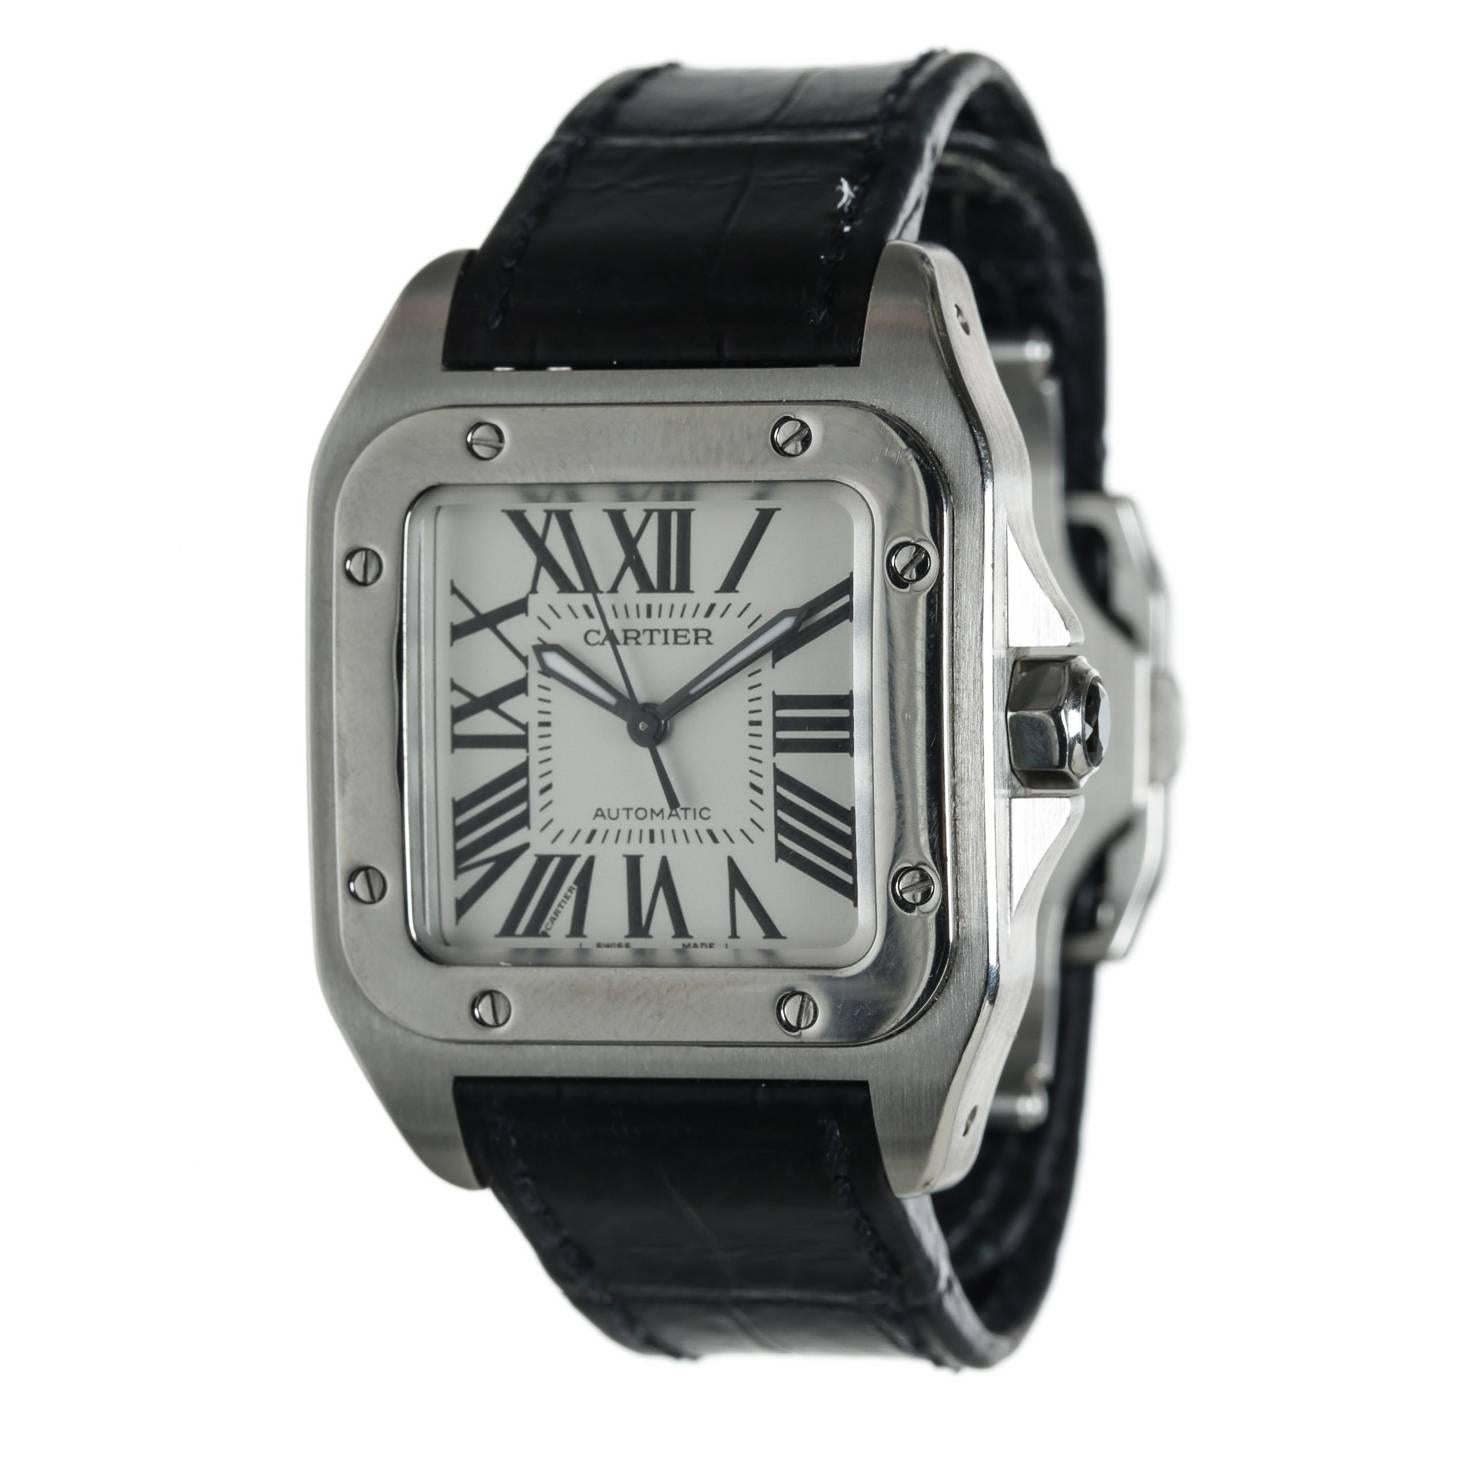  Cartier Stainless Steel Santos 100 Wristwatch For Sale